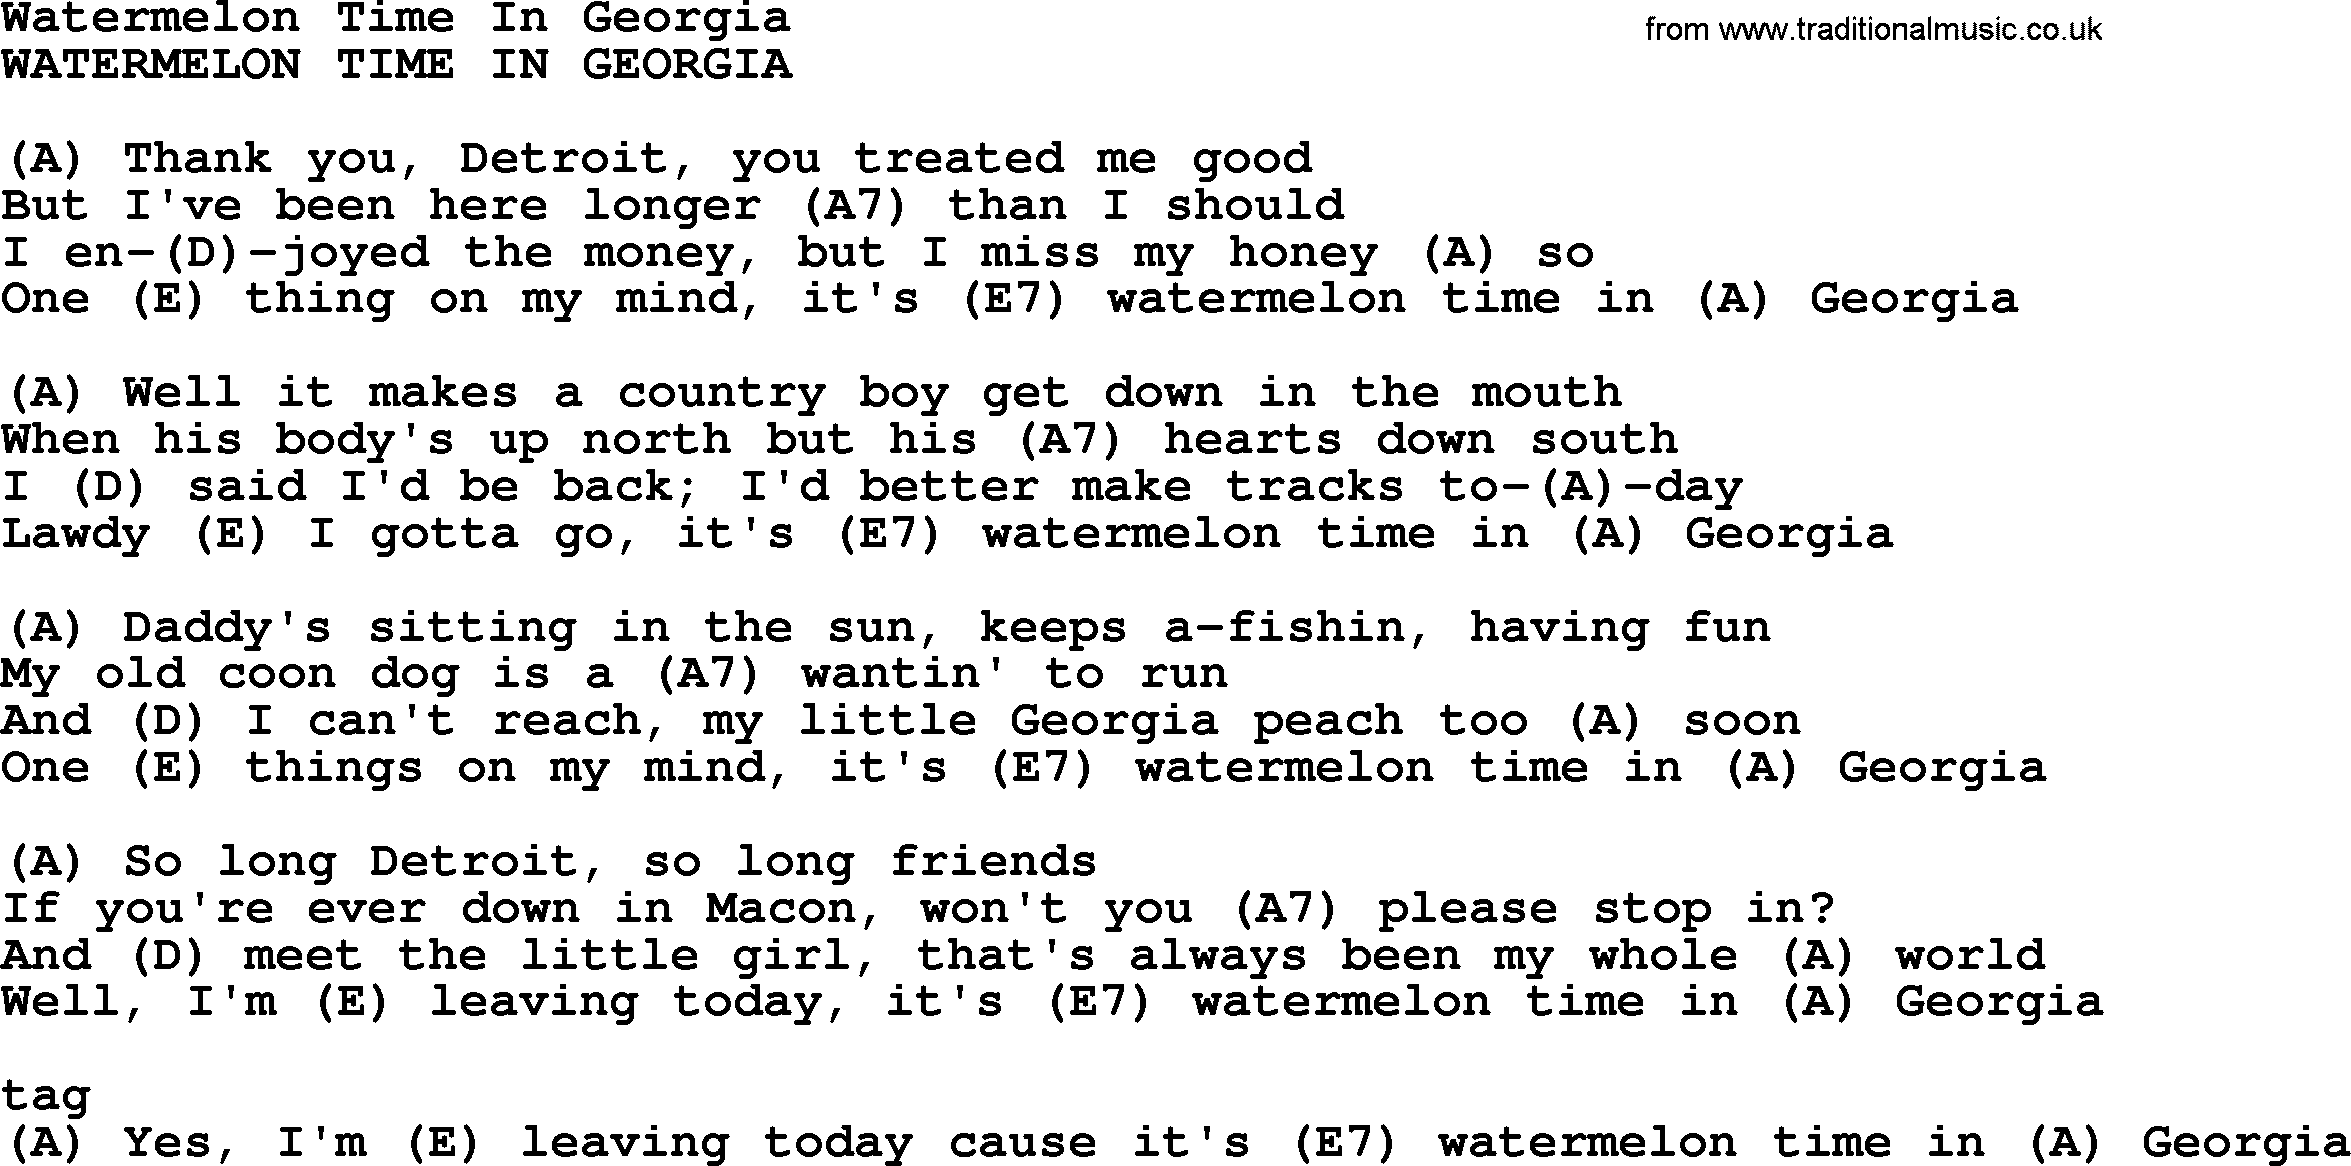 Bluegrass song: Watermelon Time In Georgia, lyrics and chords